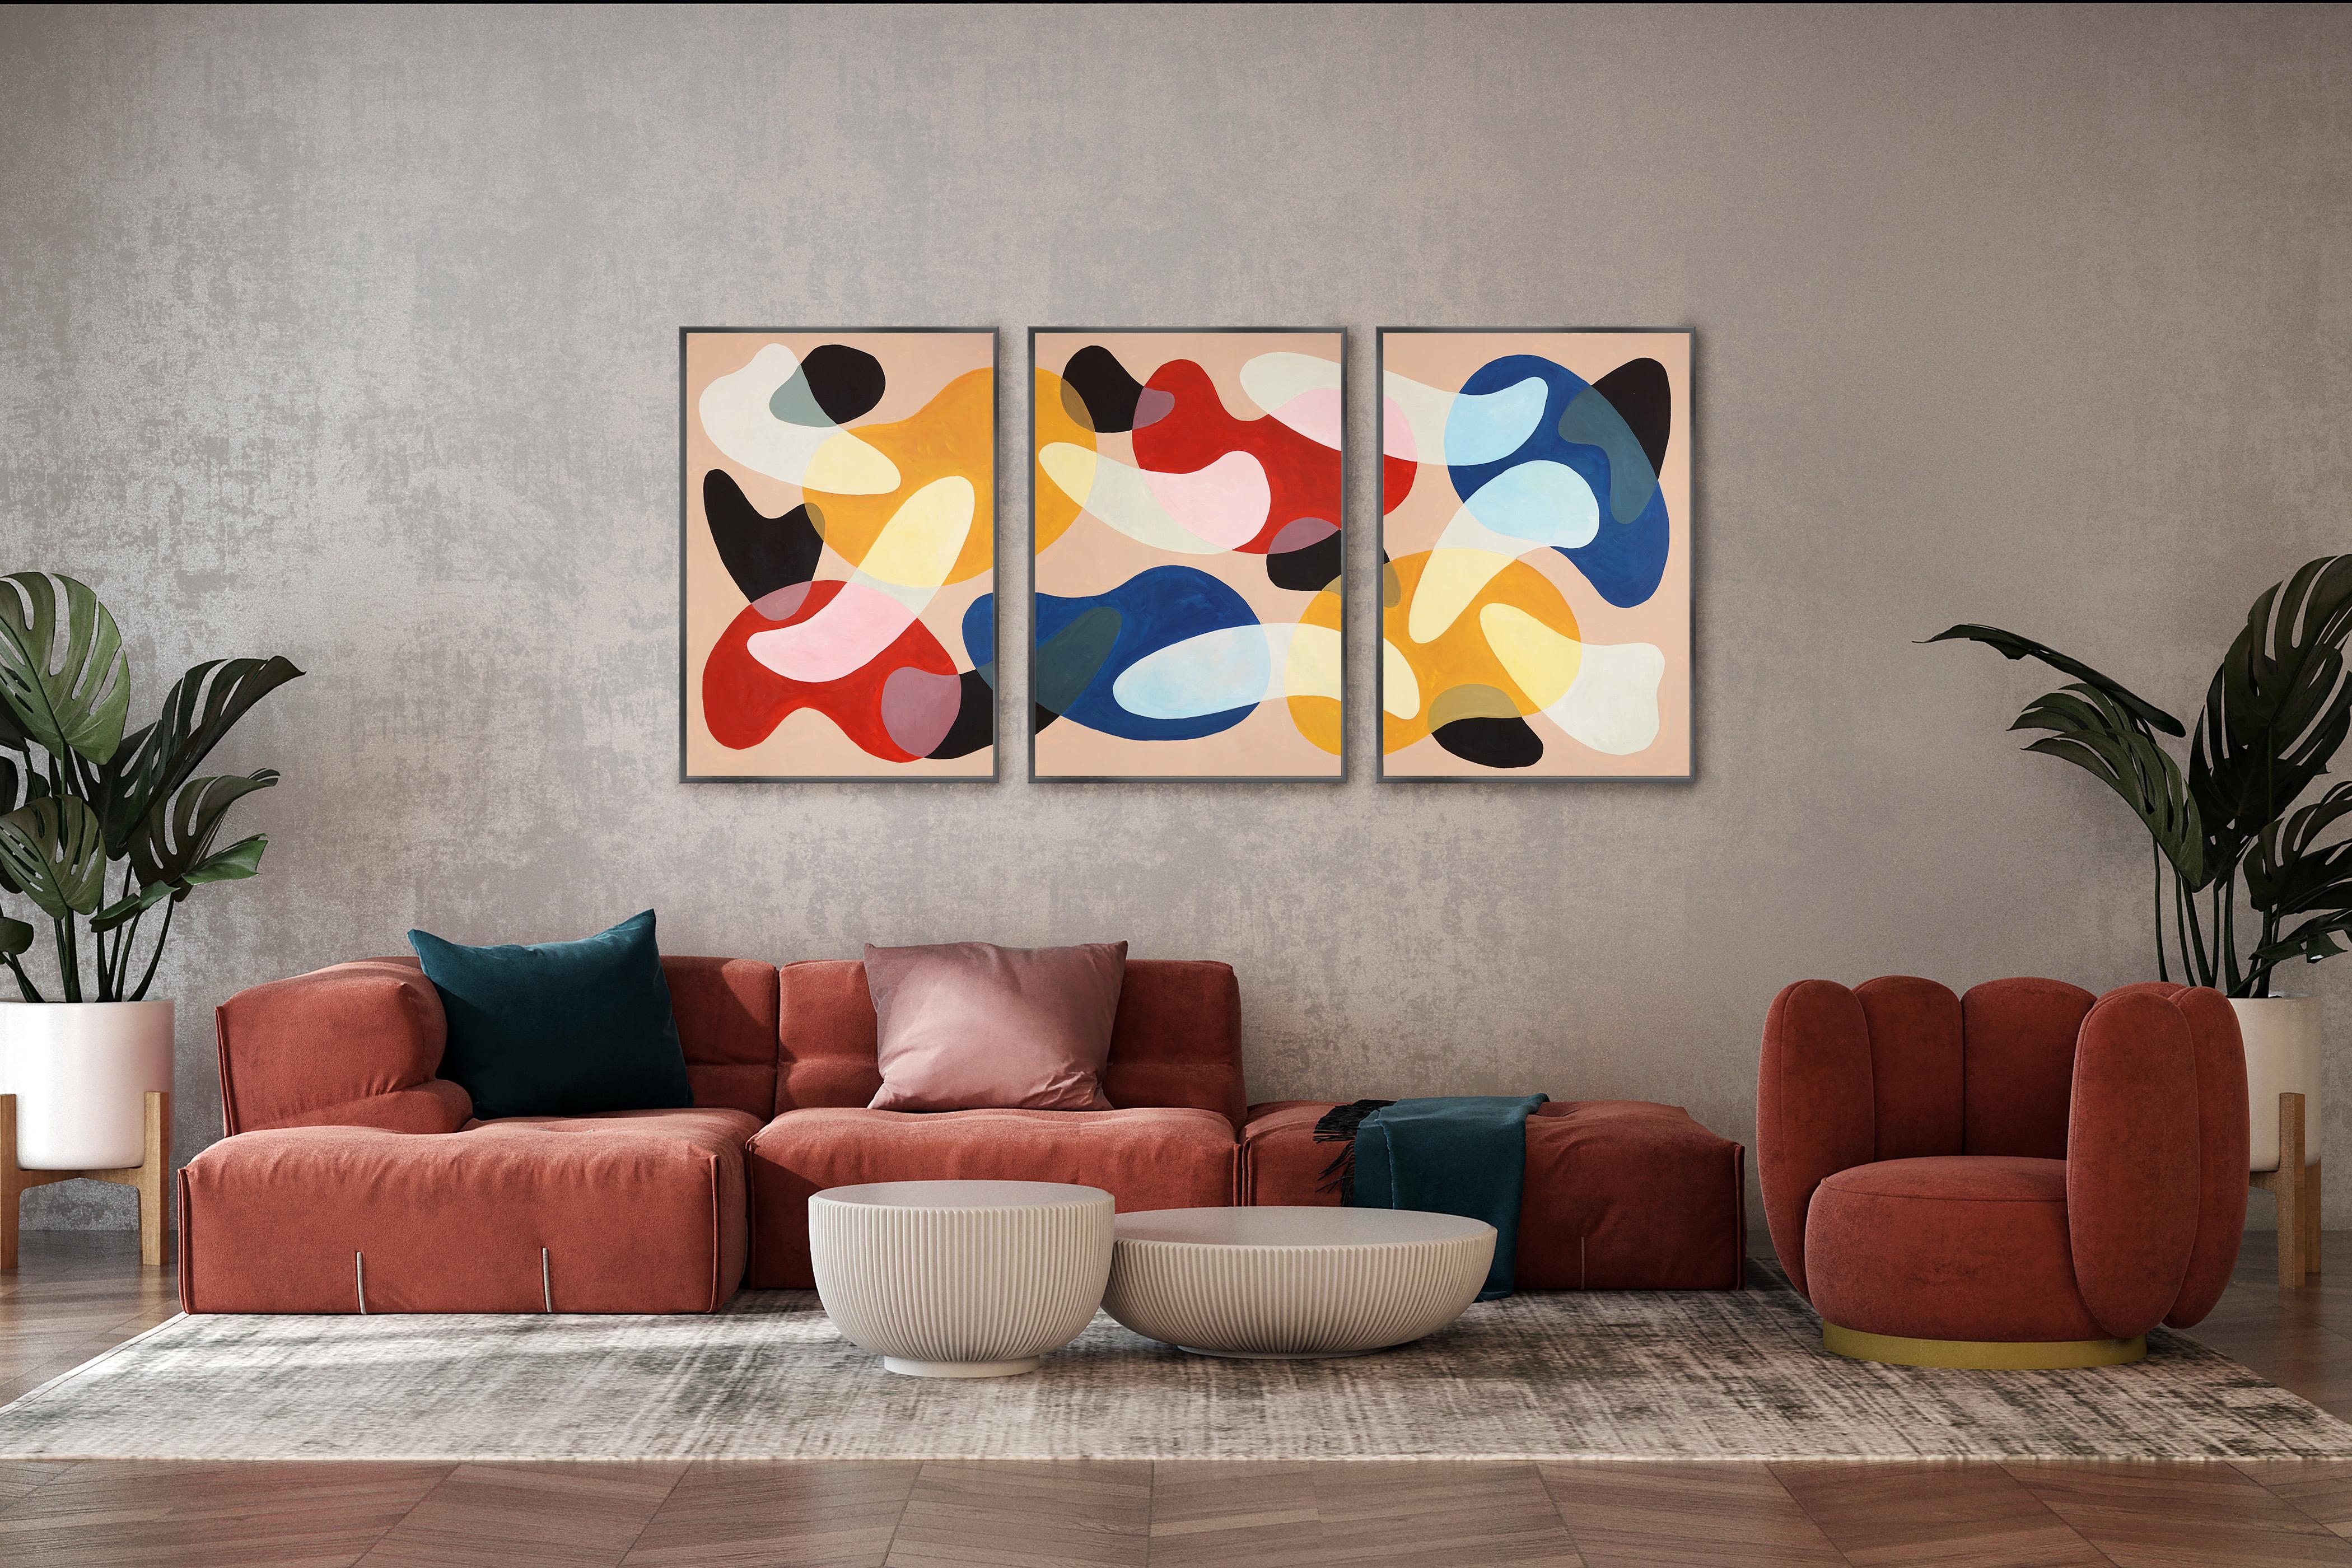 Modernist Primary Tones Triptych, Red, Yellow, Blue Abstract Midcentury  Shapes - Painting by Ryan Rivadeneyra